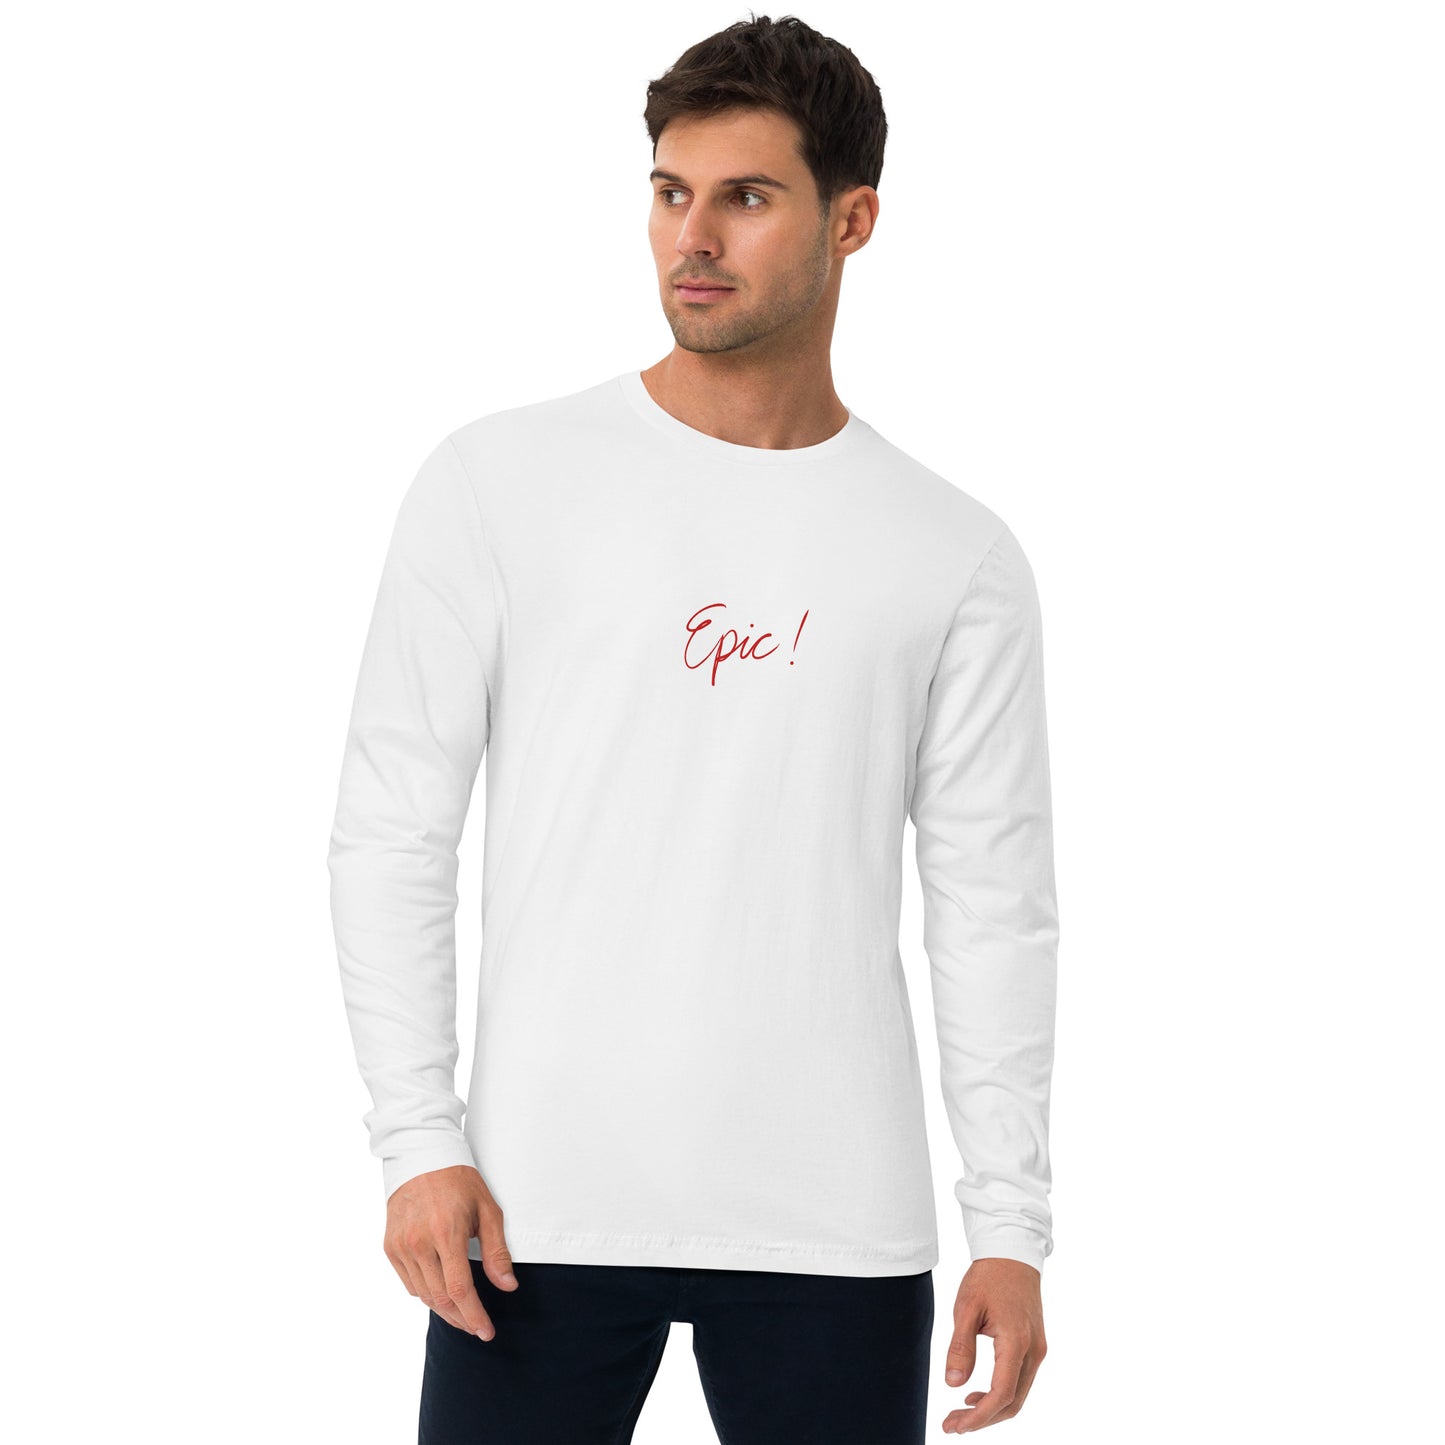 “Epic” Long Sleeve Fitted Crew